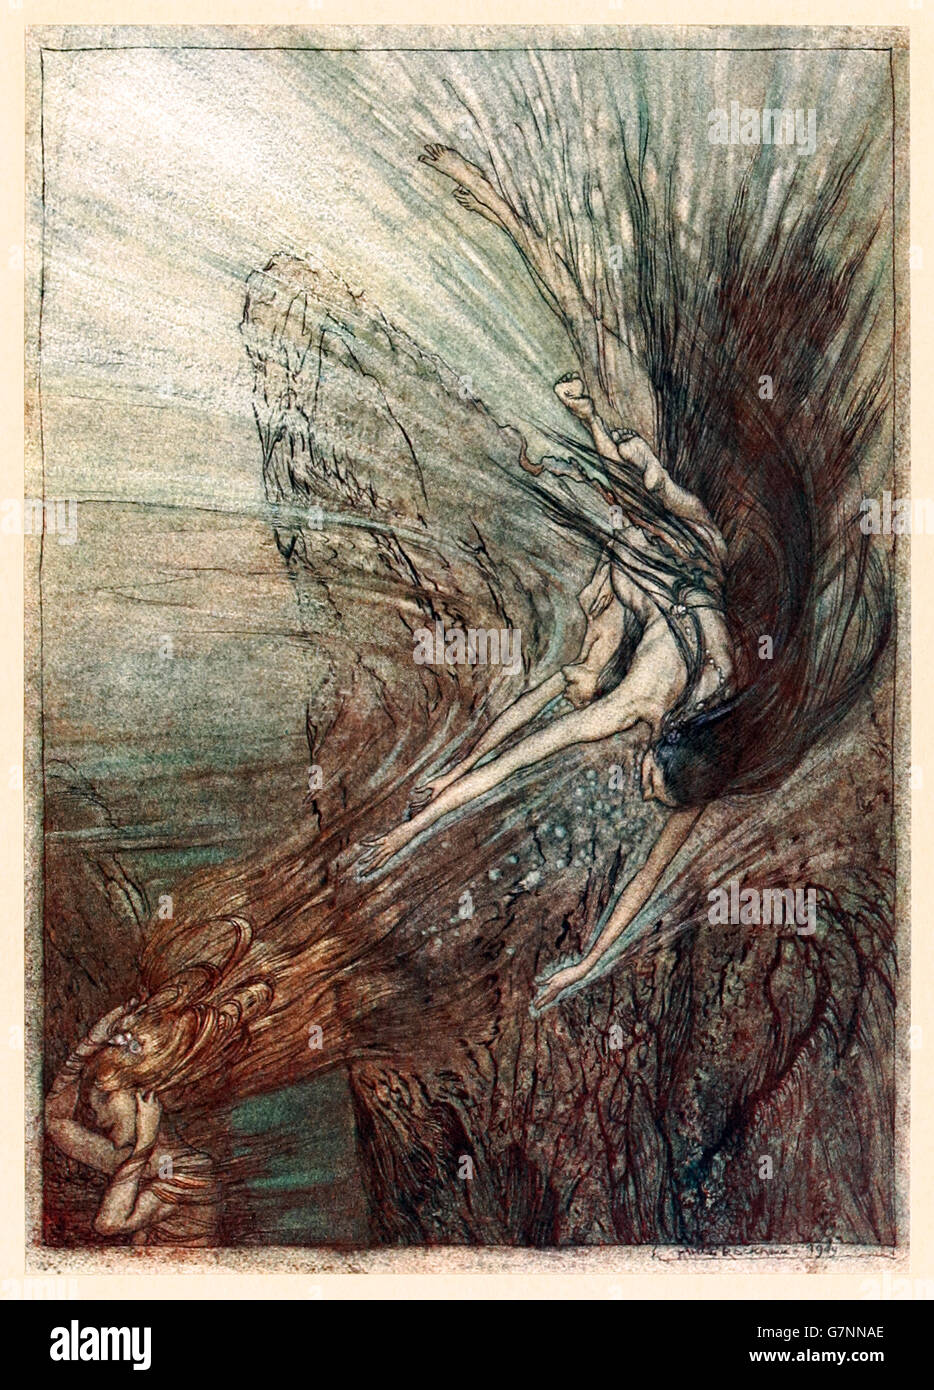 “The frolic of the Rhine-Maidens’ from ‘The Rhinegold & the Valkyrie’ illustrated by Arthur Rackham (1867-1939), published in 1910. In the greenish-blue depths of the river the Rhinemaidens are swimming about in play Stock Photo